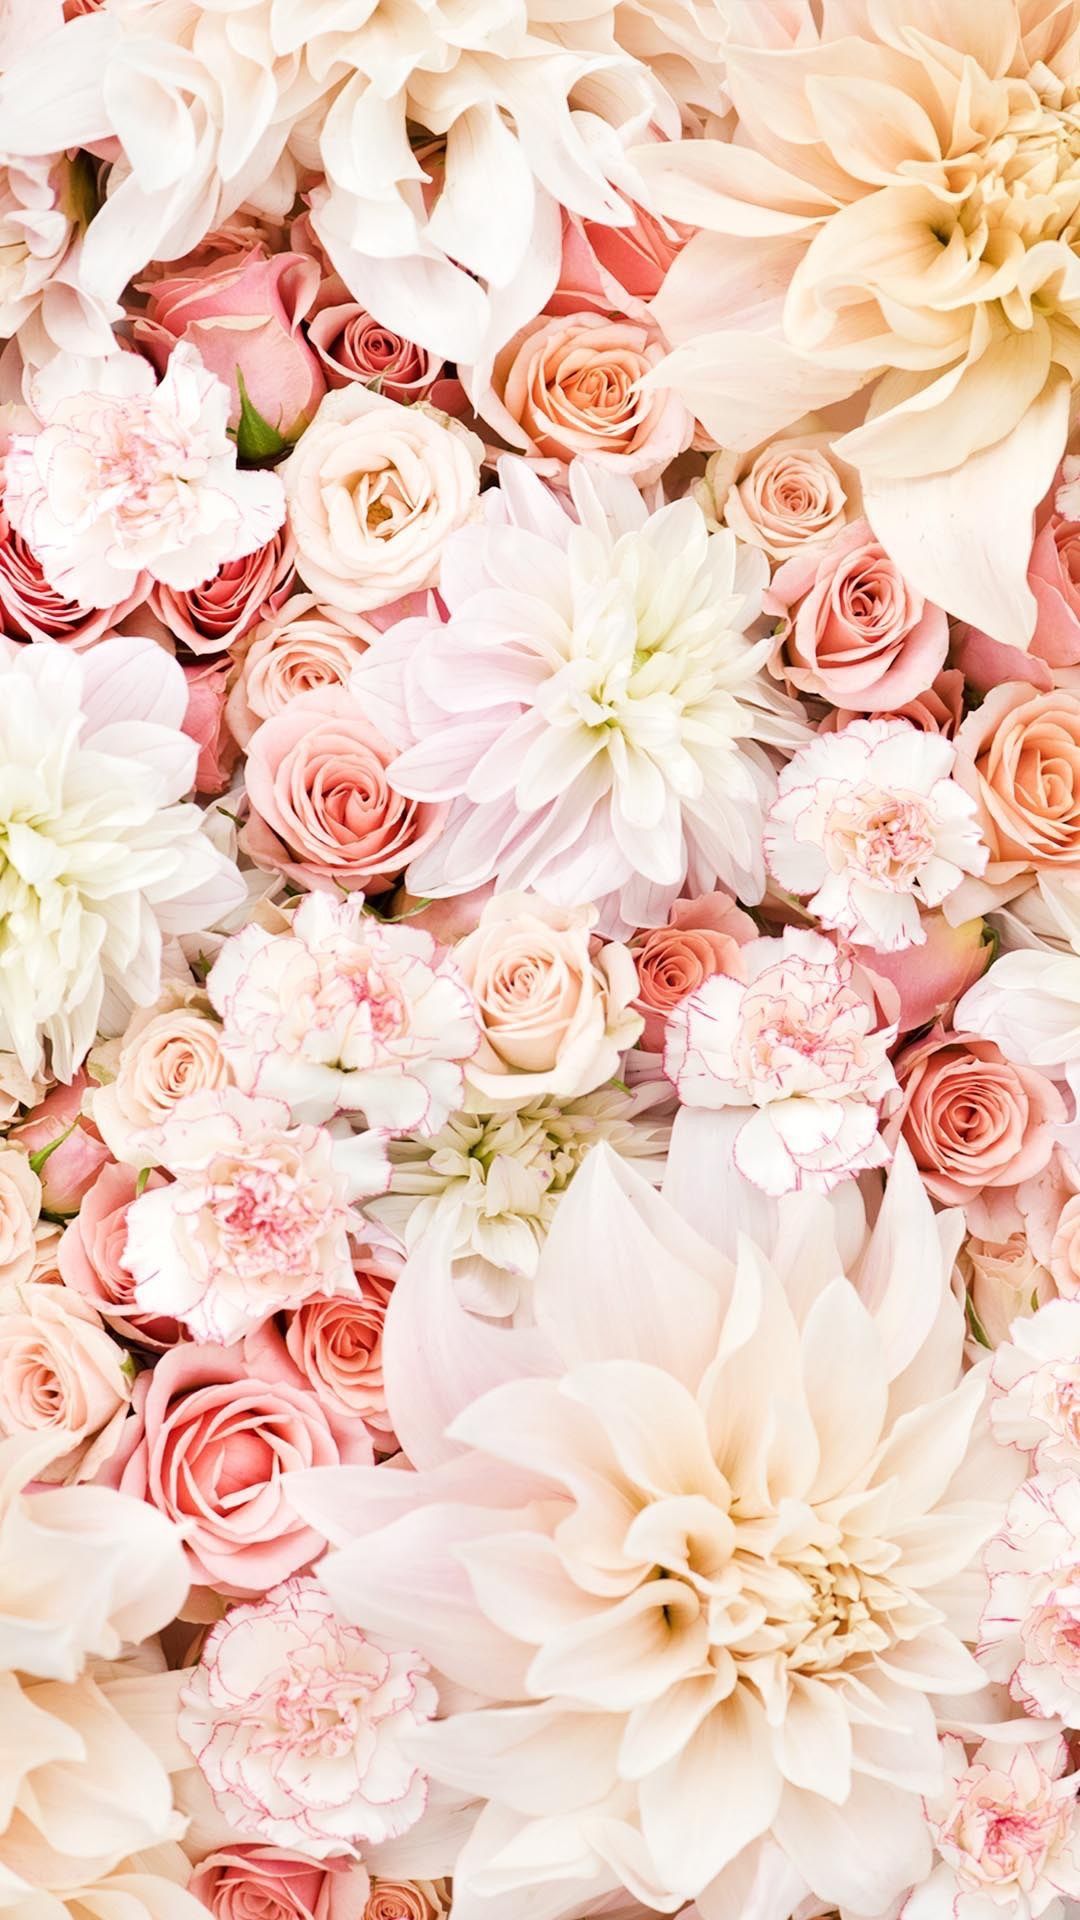 Flower Backgrounds For Iphone - HD Wallpaper 